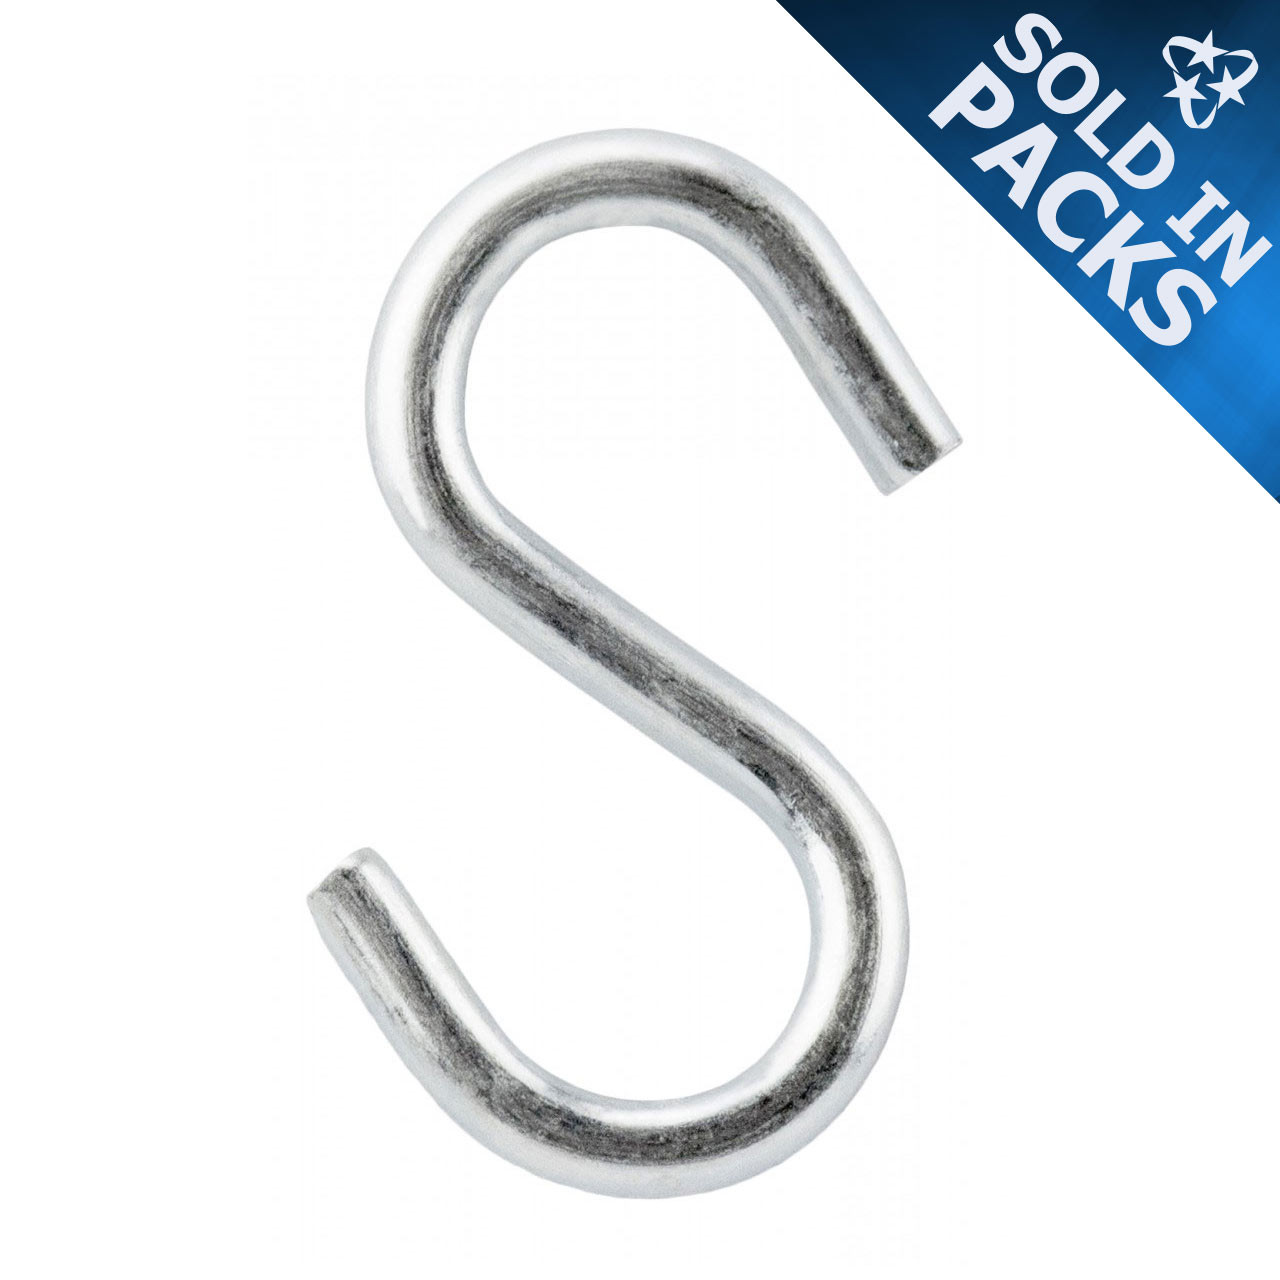 Euroart Hardware Stainless Steel Hooks Colection Huge Range of Hooks in  Different Sizes and Designs buffered Hook rubber 